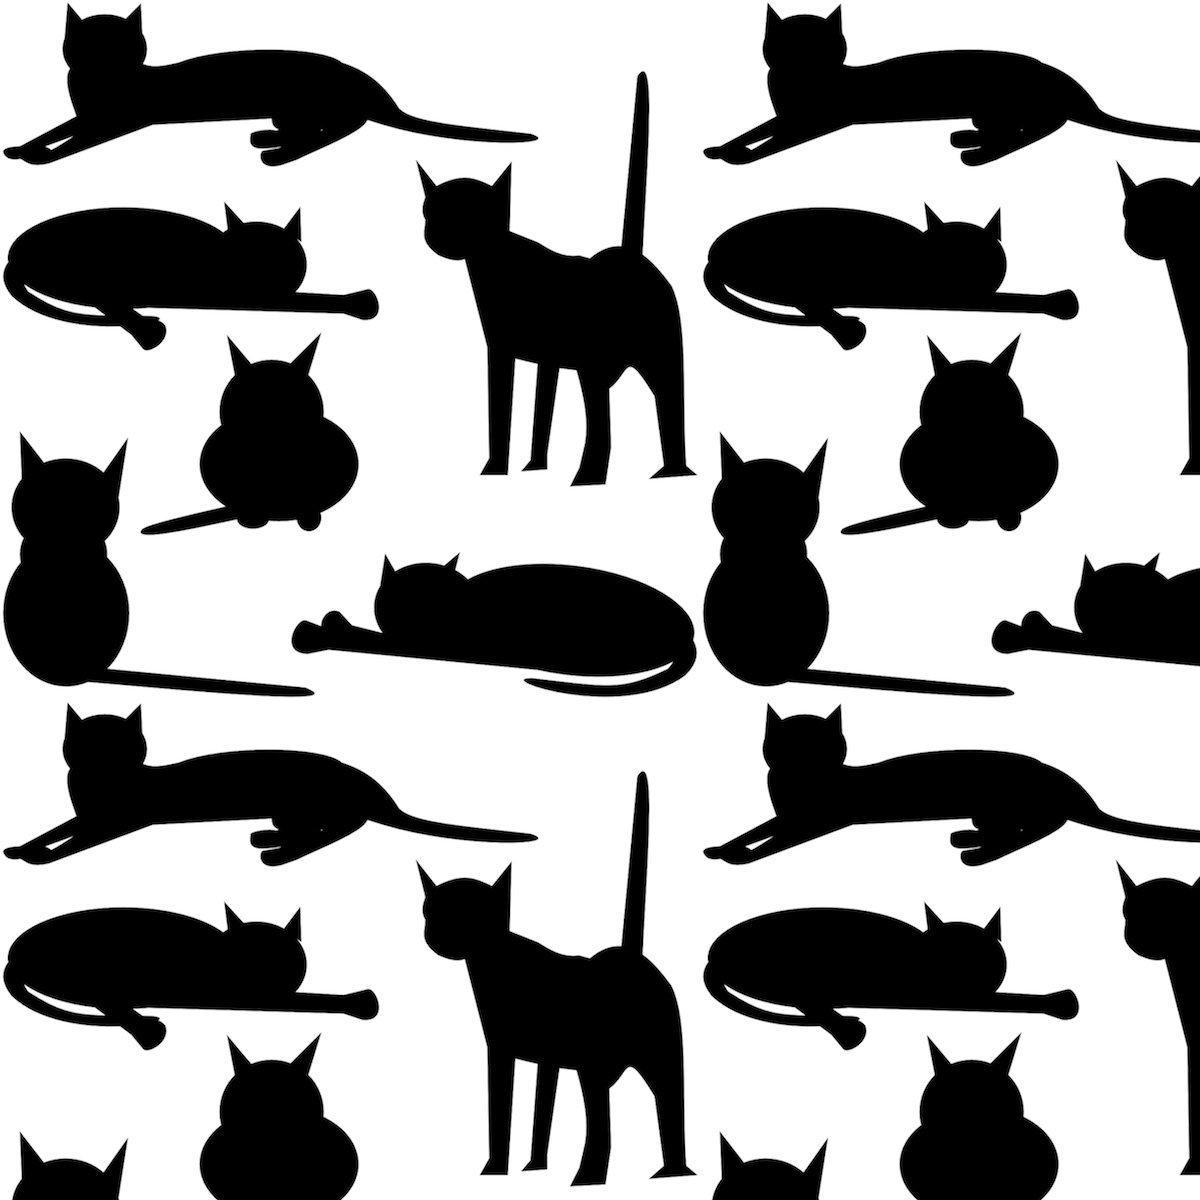 free-digital-cat-pattern-black-and-white-colored-cat-pattern